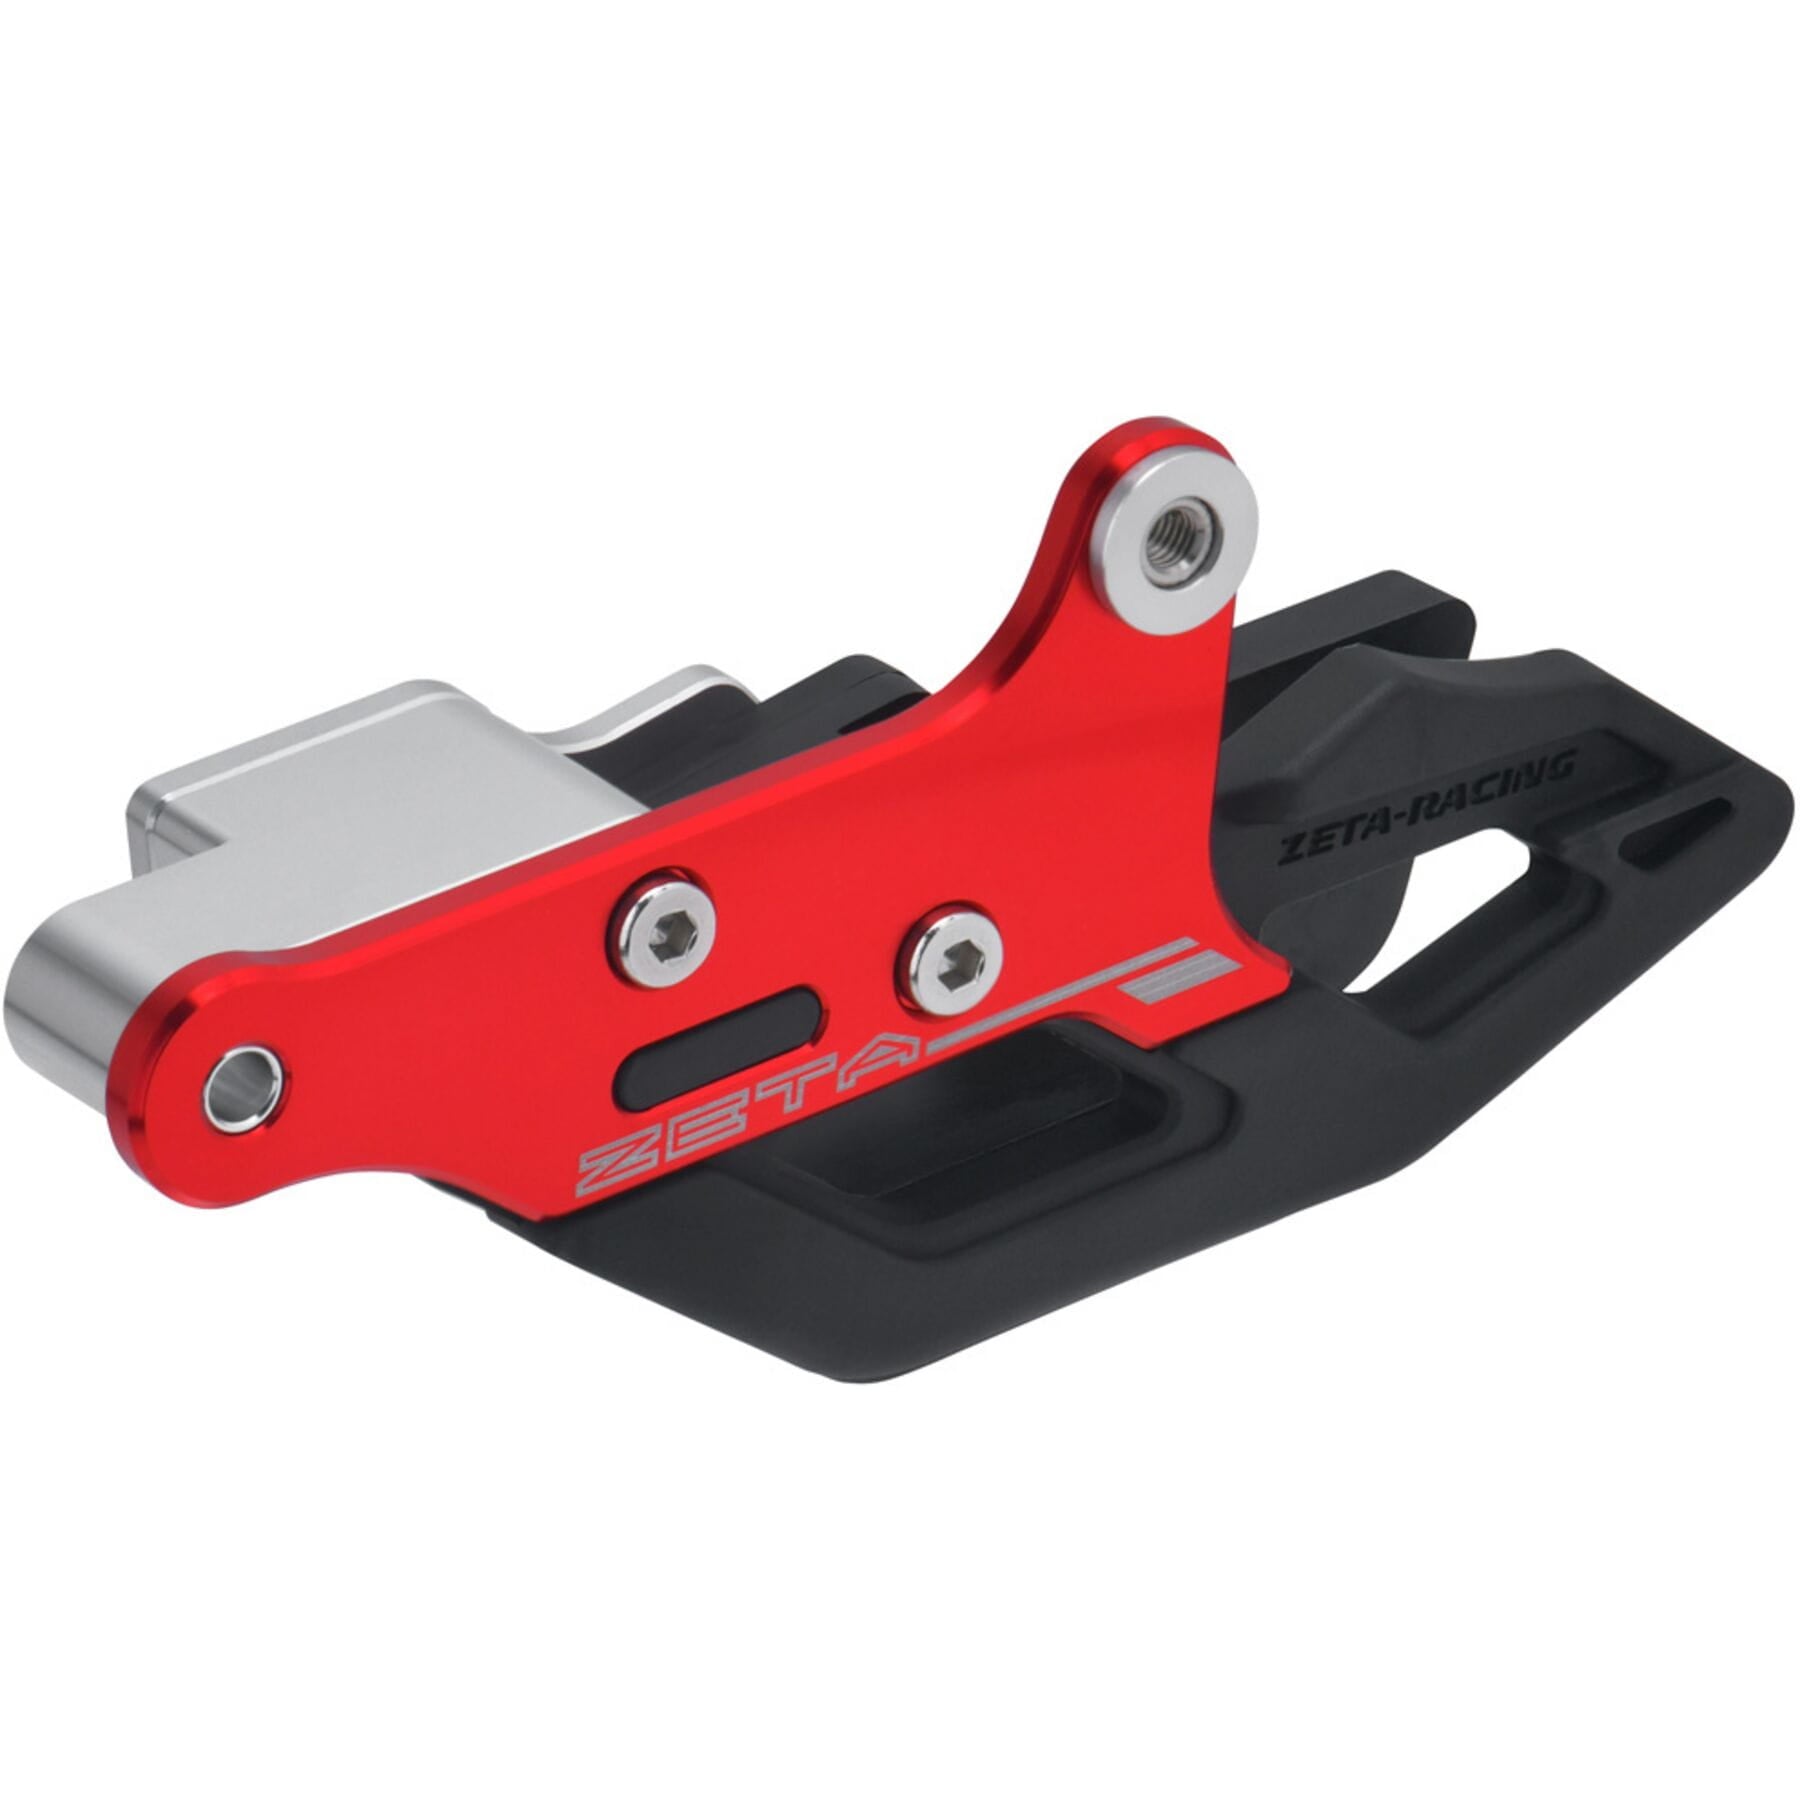 Gas Gas MC/EX/EC 2021 model red chain guide on white background